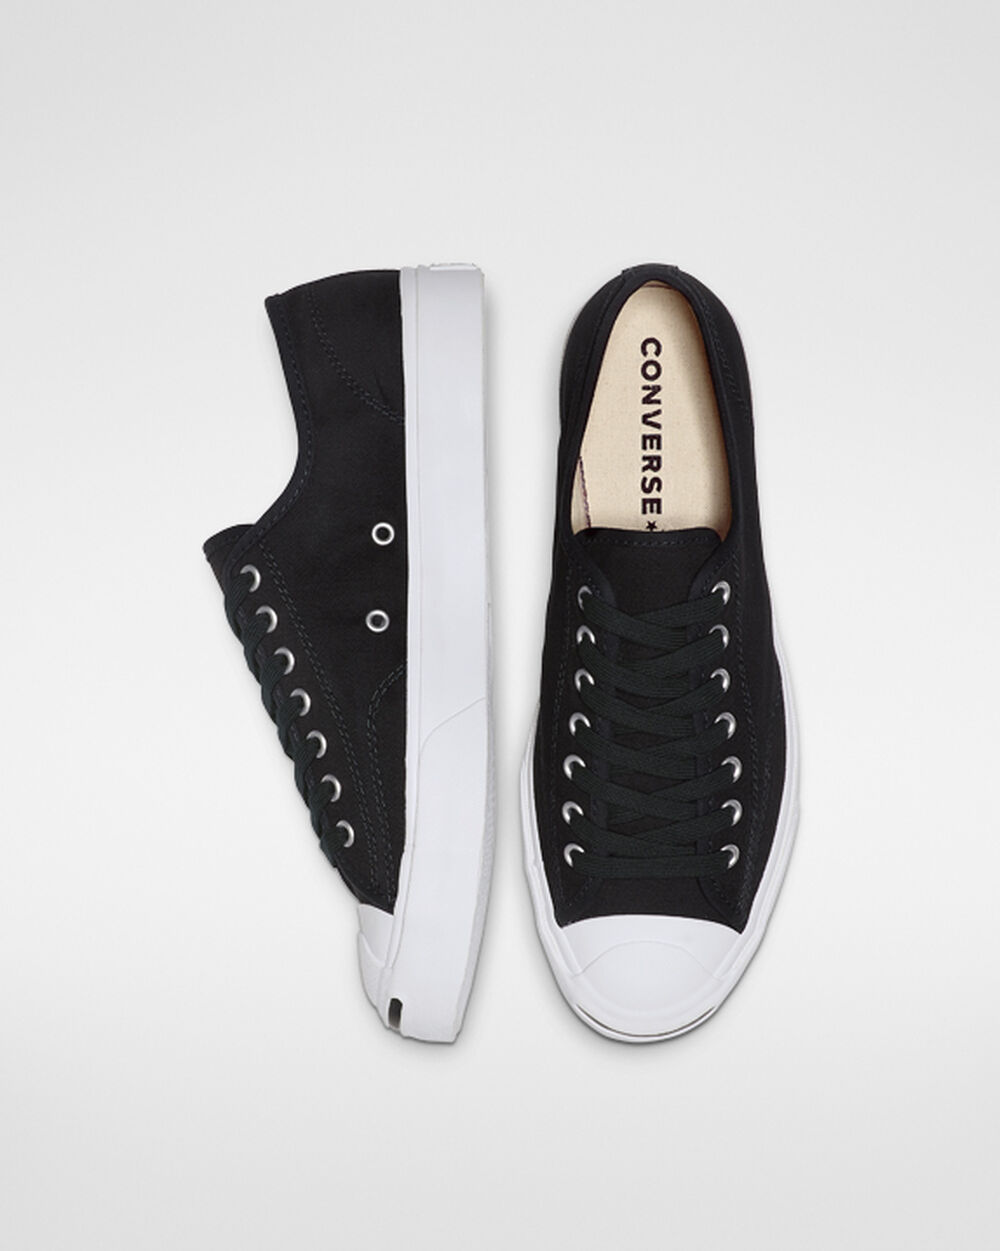 Tenis Converse Jack Purcell Mujer Negros Blancos Negros | Mexico-21066